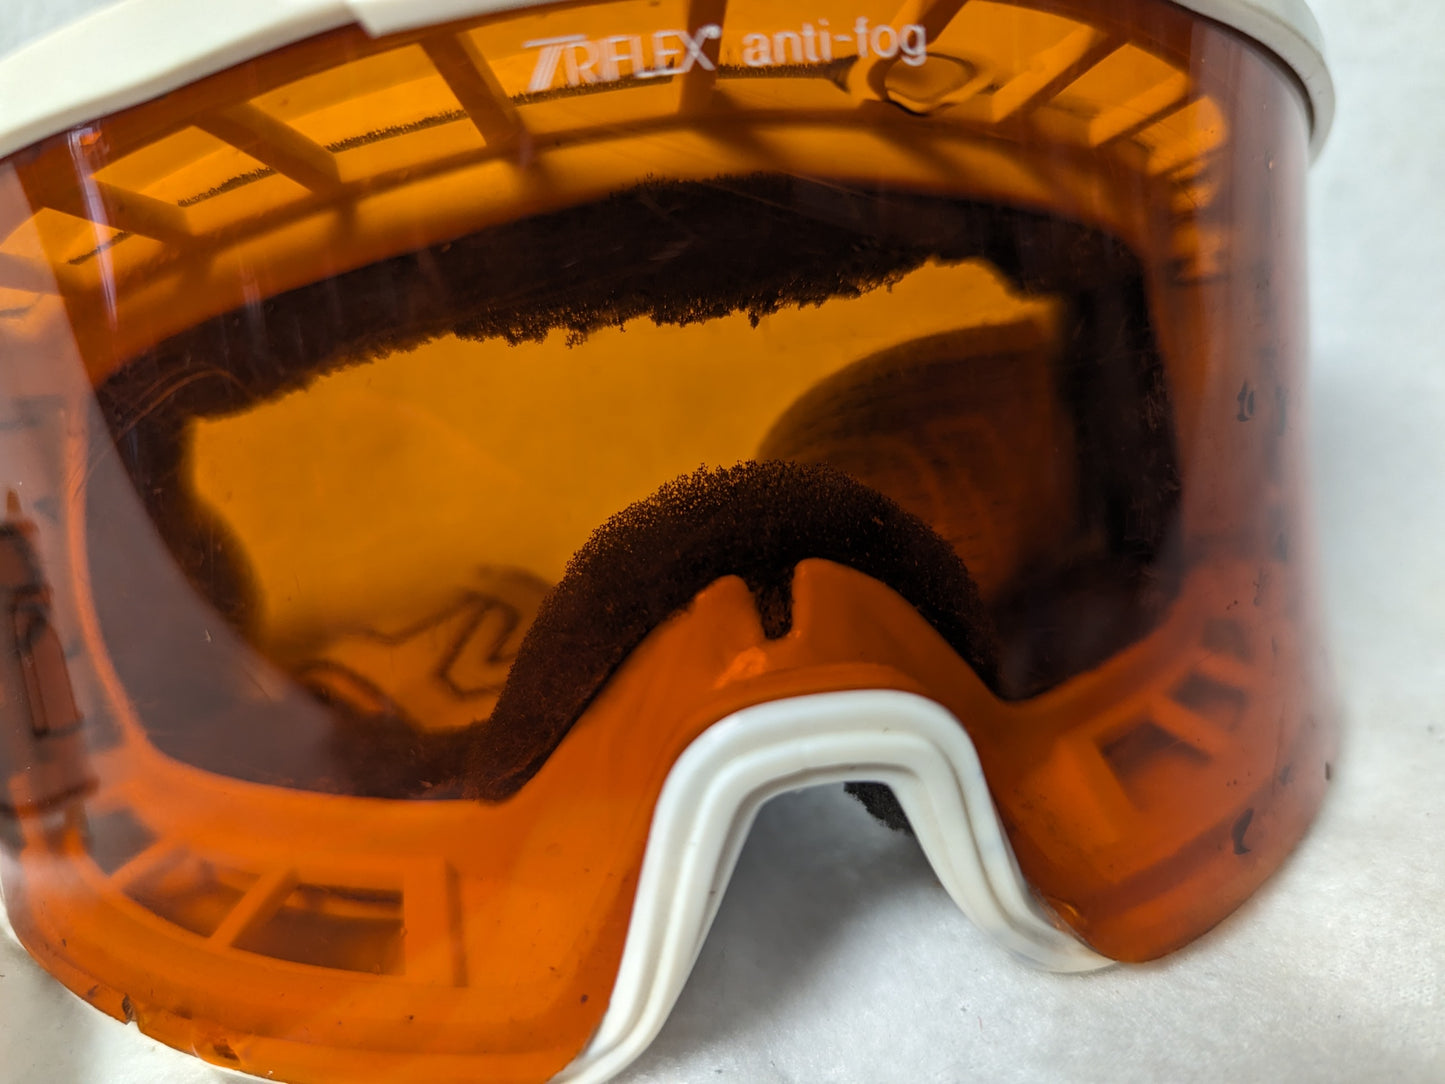 Uvex Ski/Snowboard Goggles Size Adult Color White Condition Used